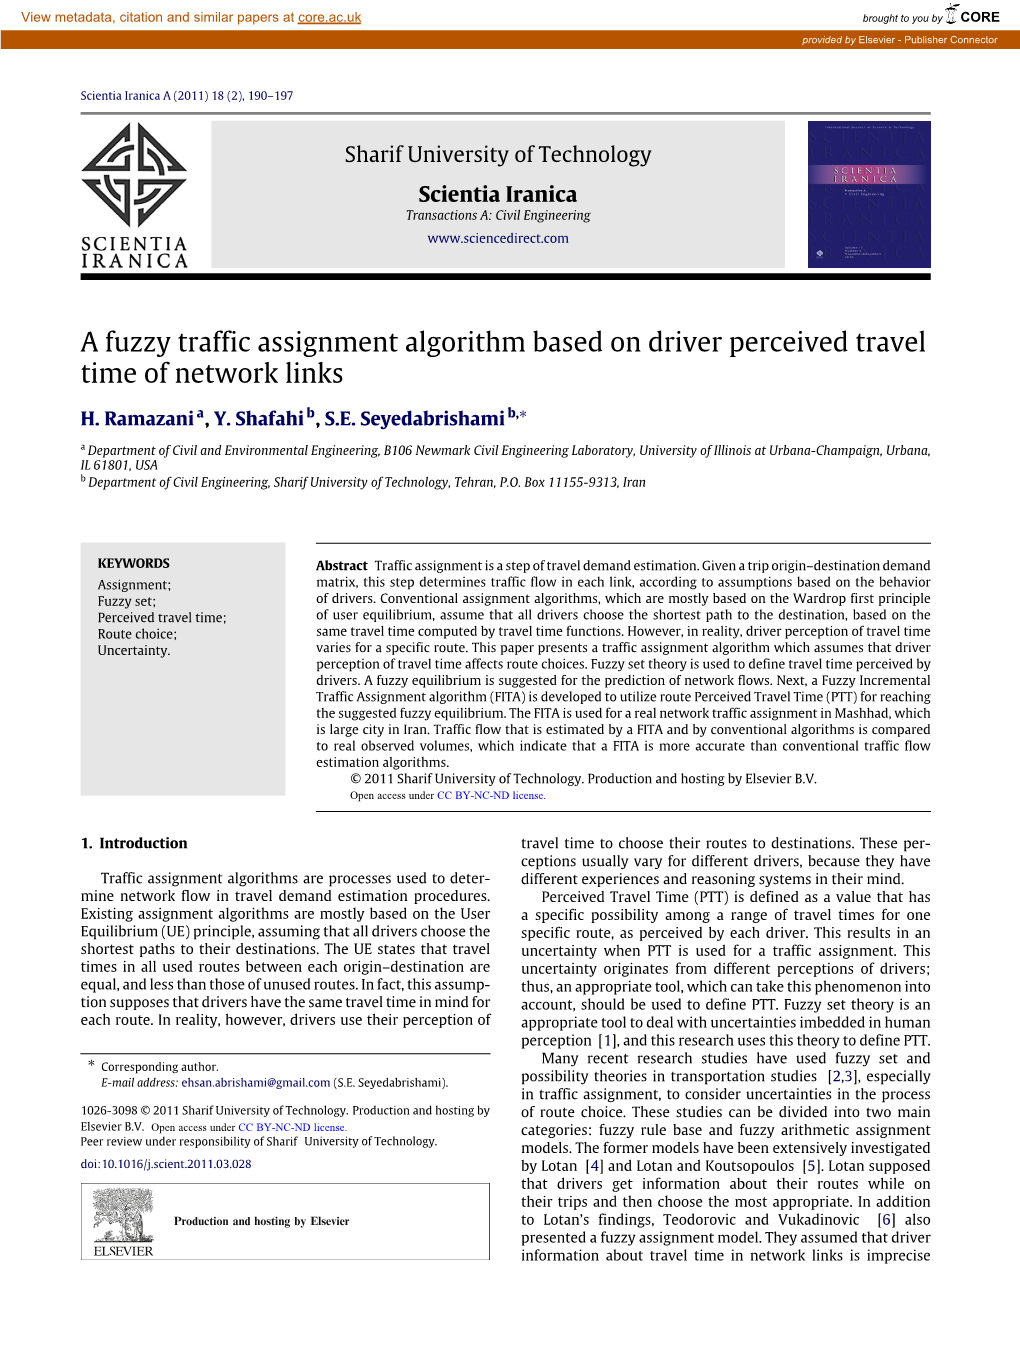 A Fuzzy Traffic Assignment Algorithm Based on Driver Perceived Travel Time of Network Links